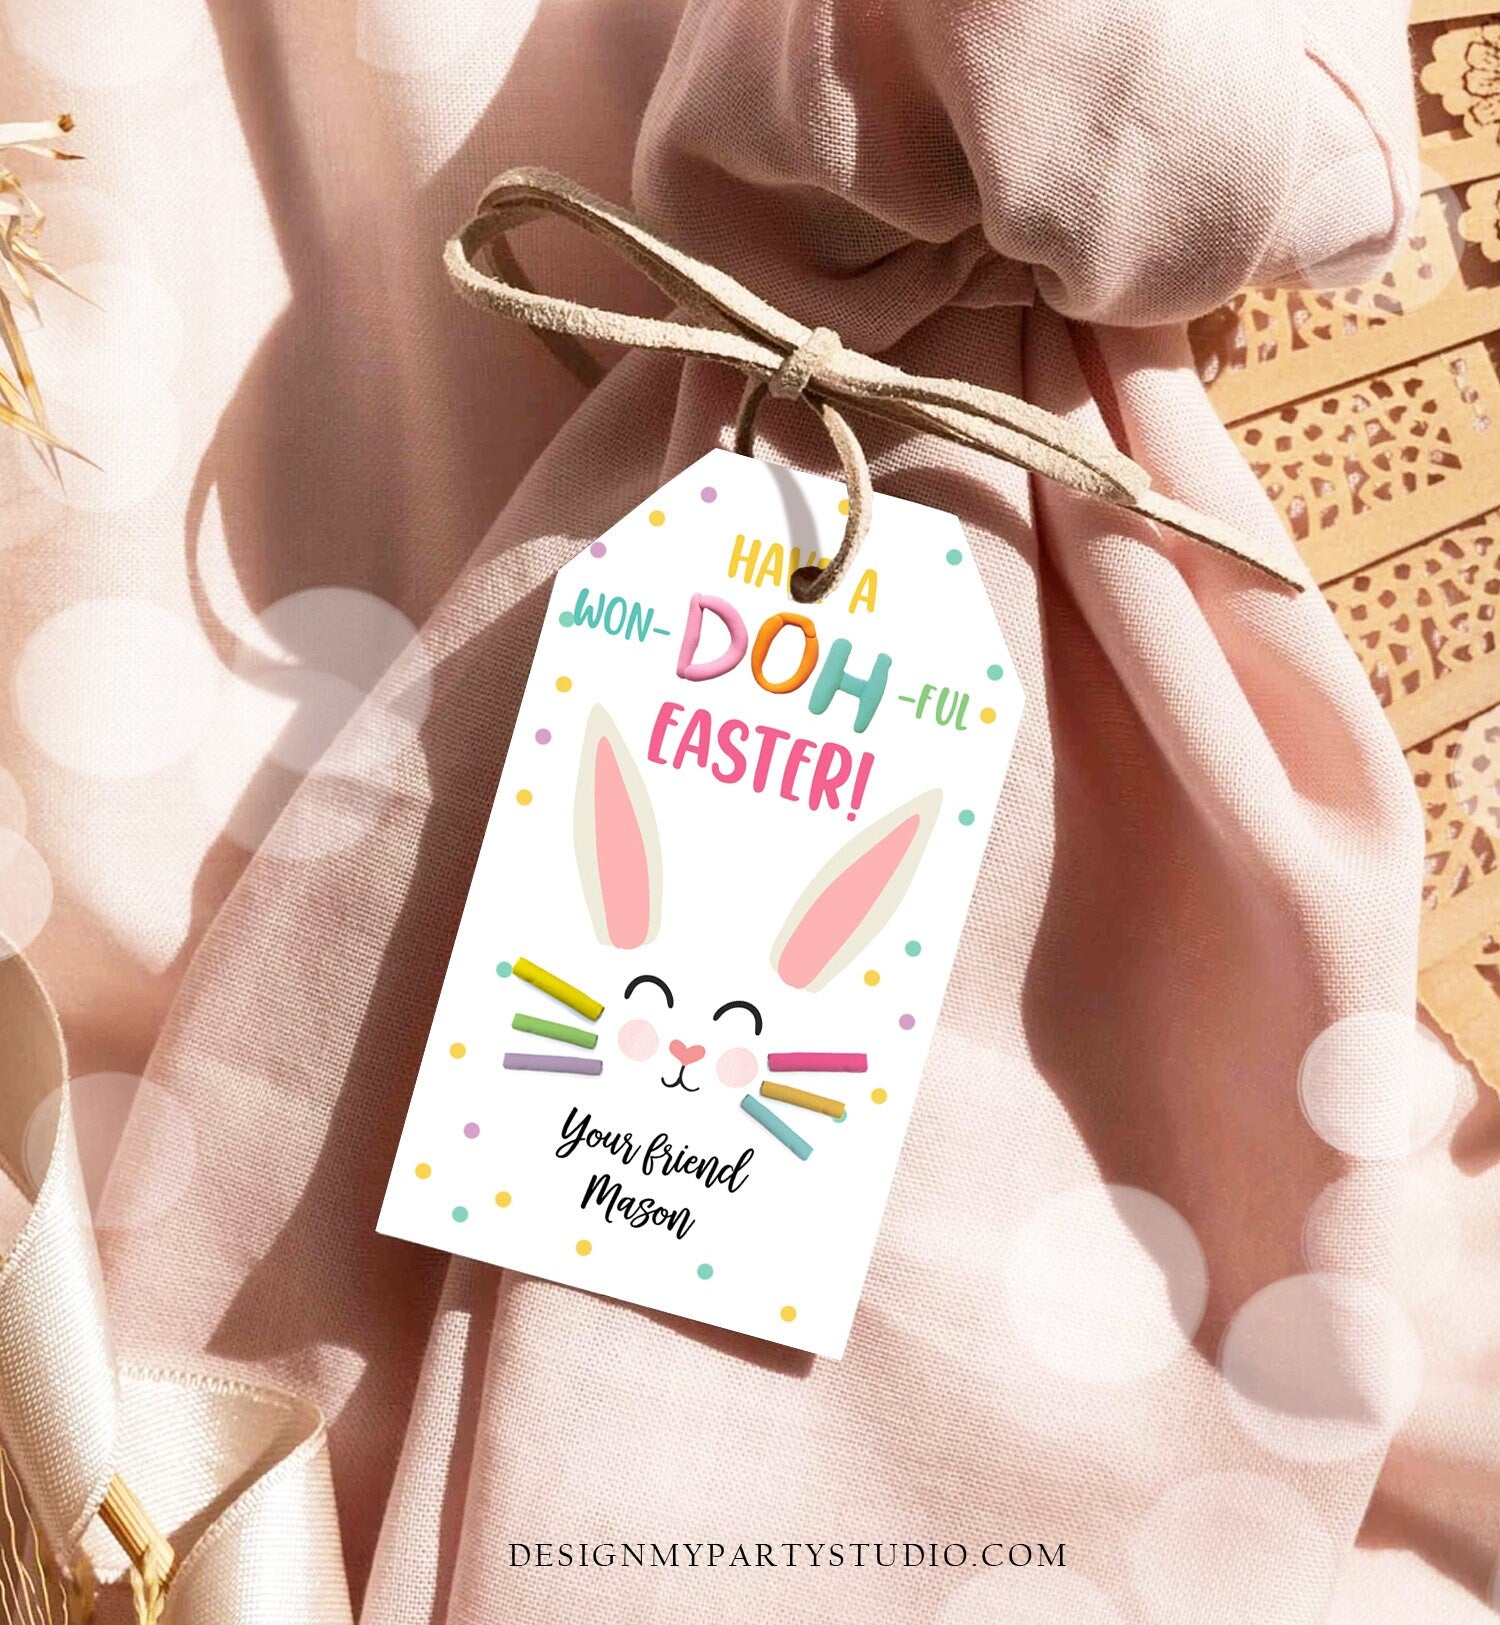 Editable Play-Doh Easter Gift Tags Easter Favor Tags Clay Toy Easter Cards Kids School Won Doh Ful Personalized Tag Digital PRINTABLE 0449